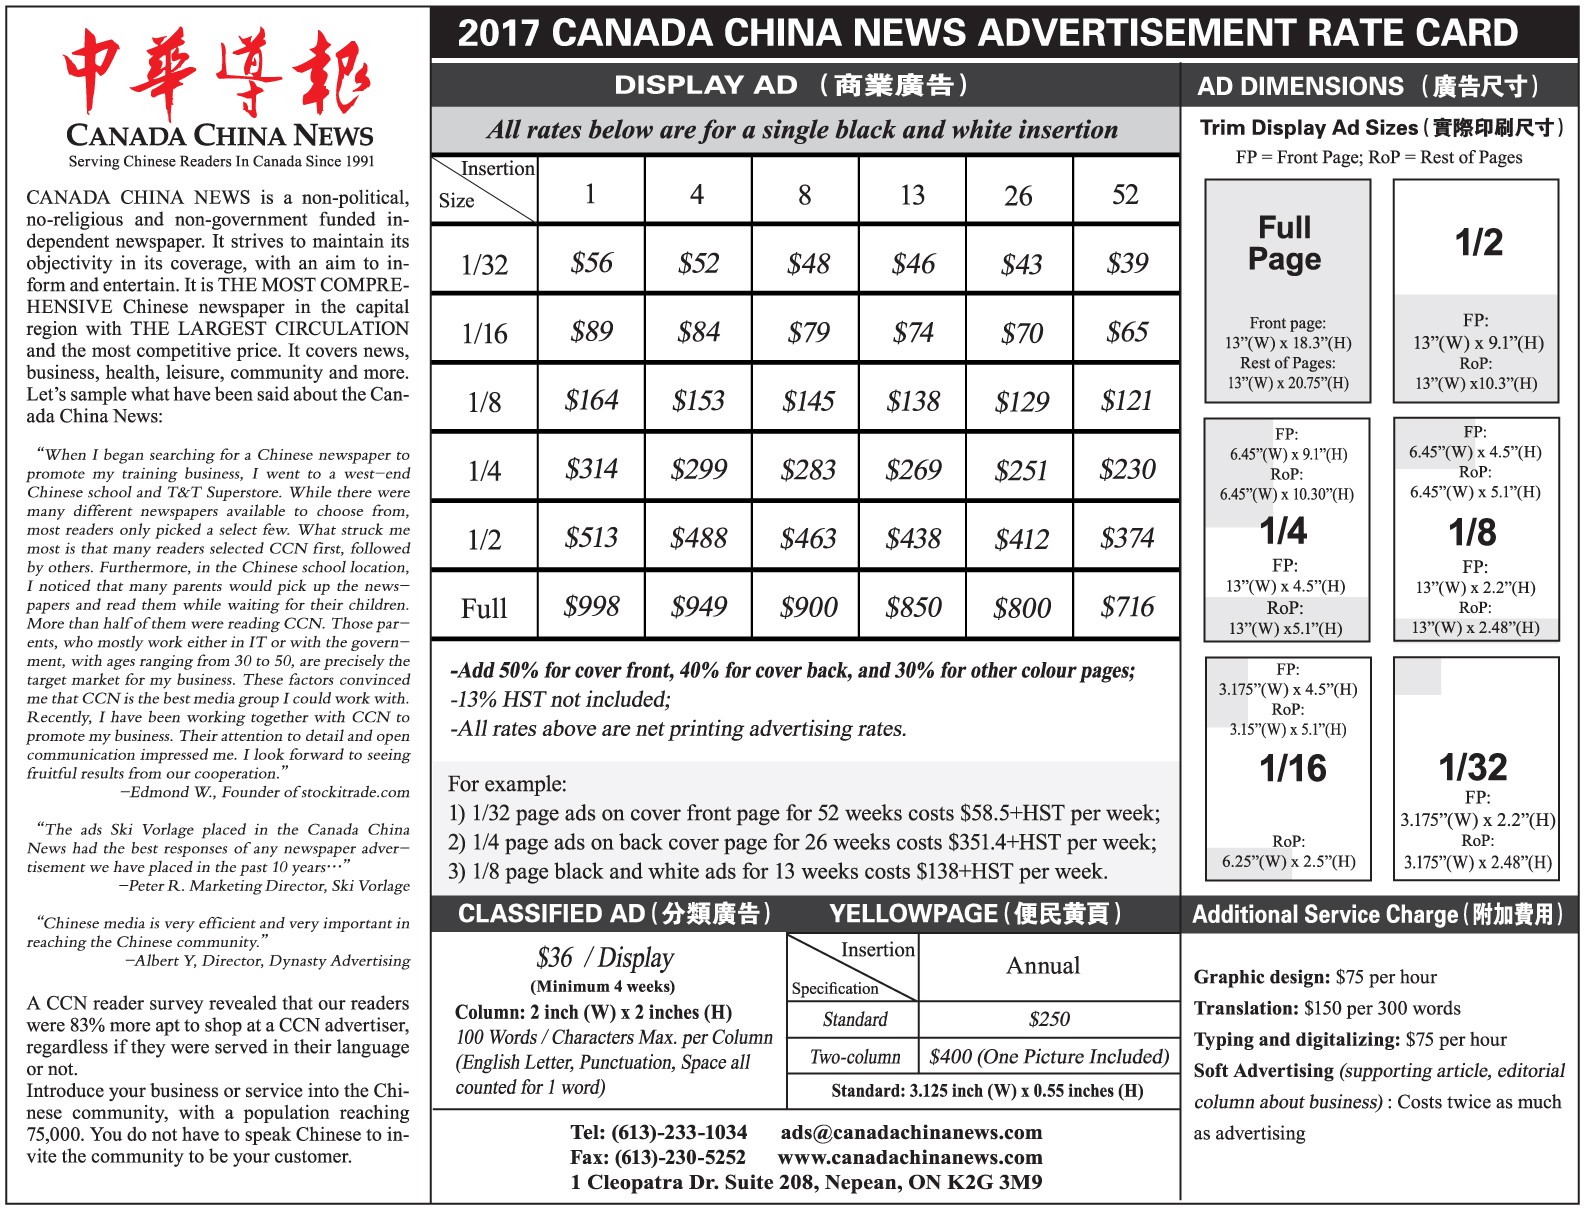 ccn-2017-rate-card-20170103